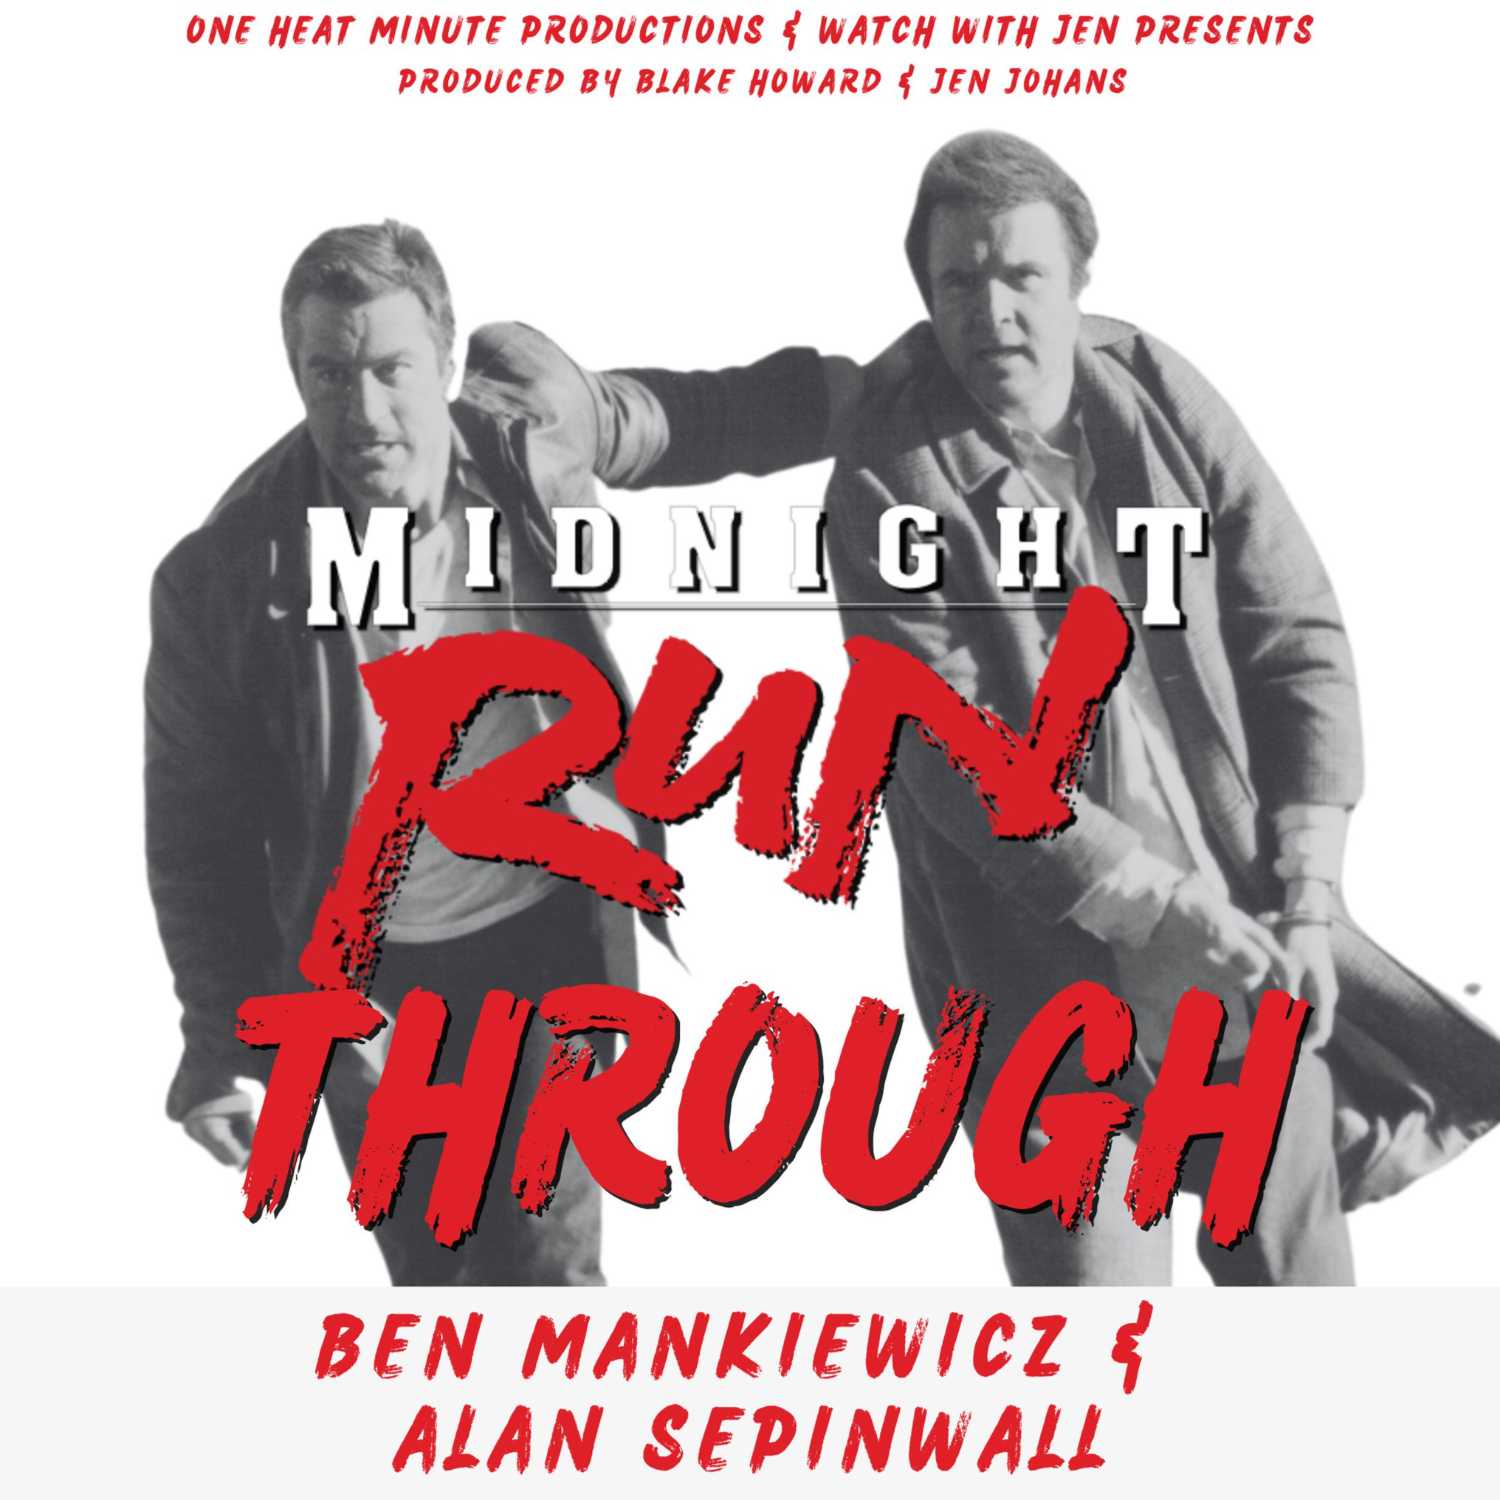 MIDNIGHT RUN-THROUGH - Episode 3 with Ben Mankiewicz & Alan Sepinwall MIDNIGHT RUN-THROUGH - Episode 3 with Ben Mankiewicz & Alan Sepinwall (From One Heat Minute Productions & Watch With Jen)